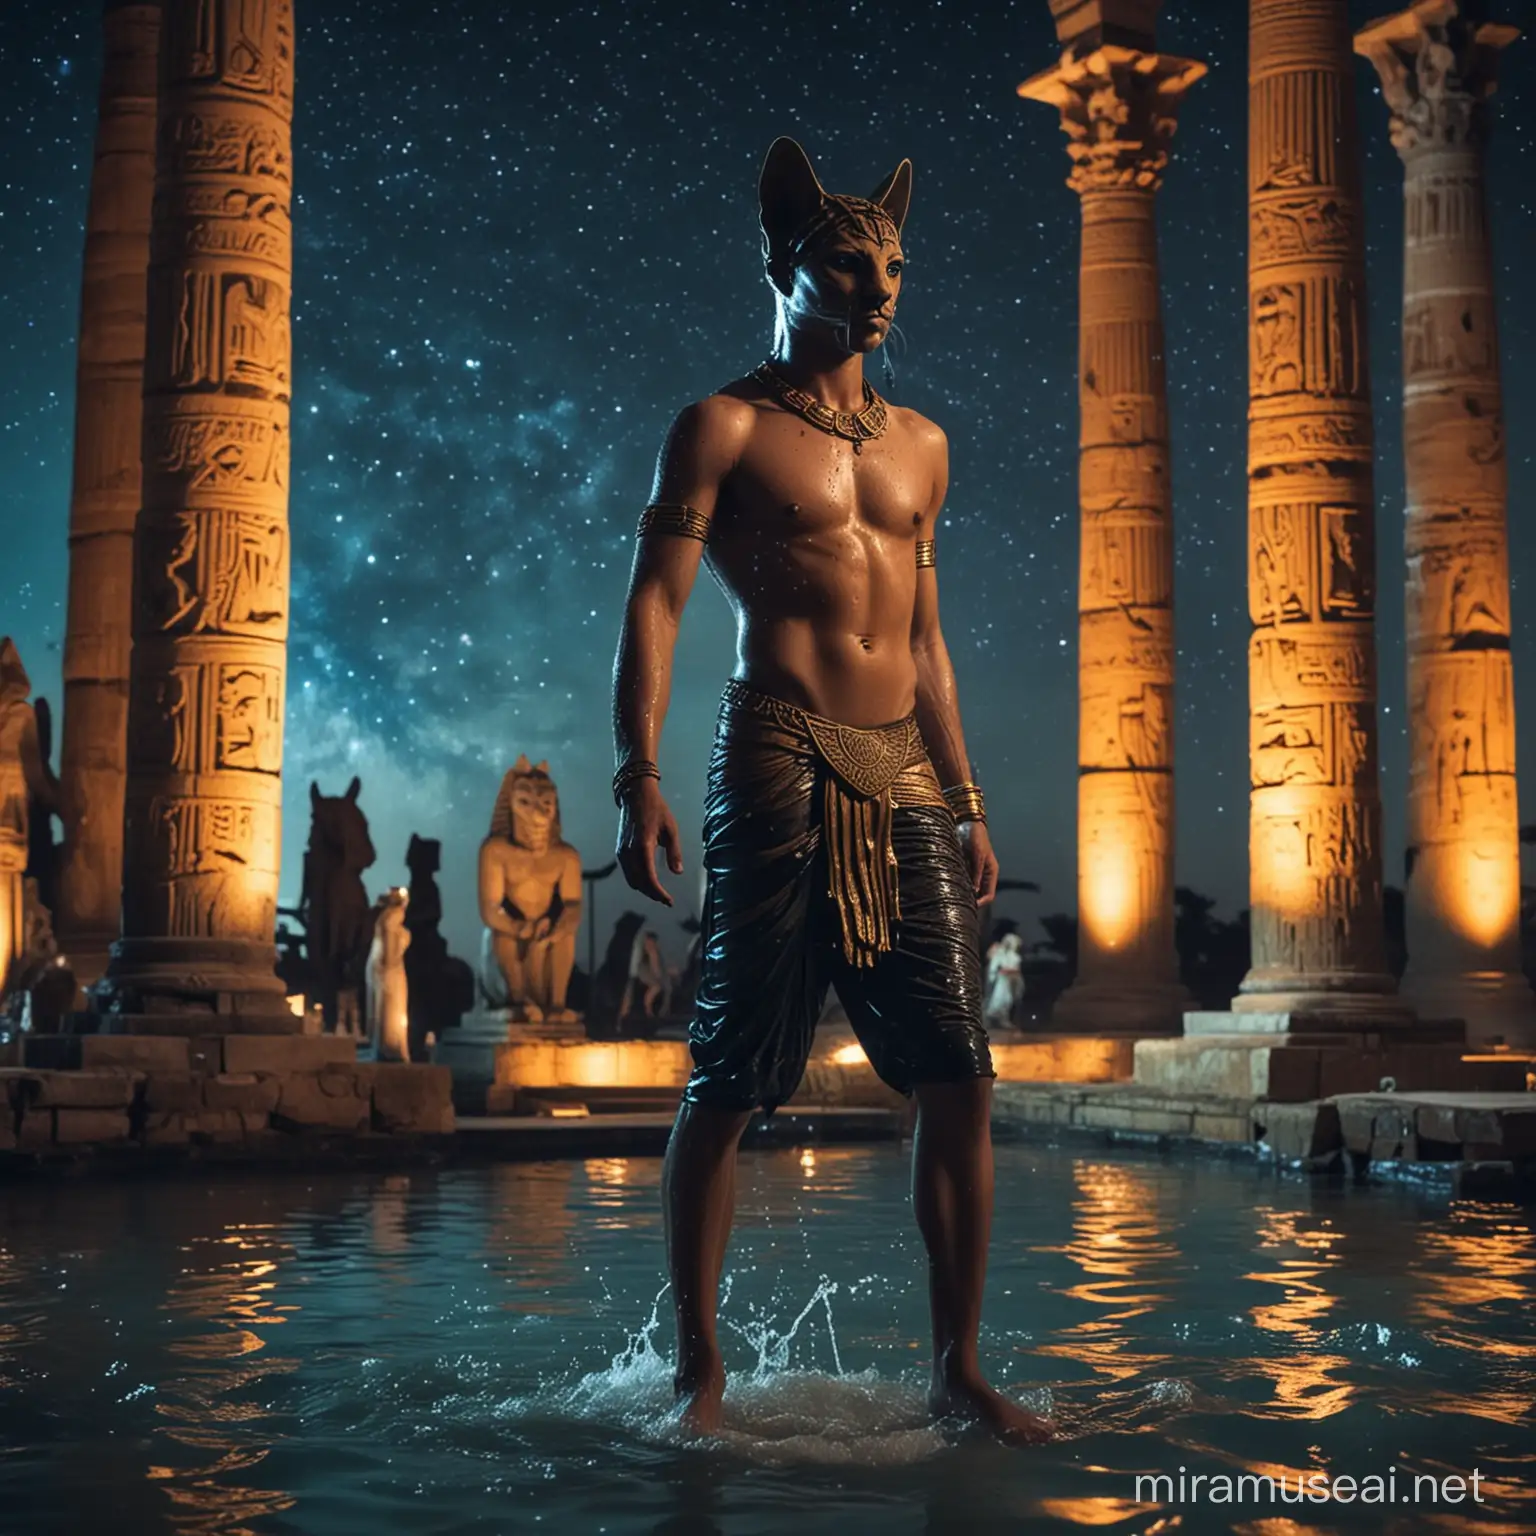 Sweaty wet, very muscled, 12 years old young teen boy, shaved hairdress, dancing in front of the statue of Bastet, with his feet in the water of an oasis. Dressed as a roman soldier shirtless. In the ruins of a egyptian temple. At night. The sky is full of stars with a huge galaxy. Blue neon colors ambient. With two leopards at the feet of the statue.